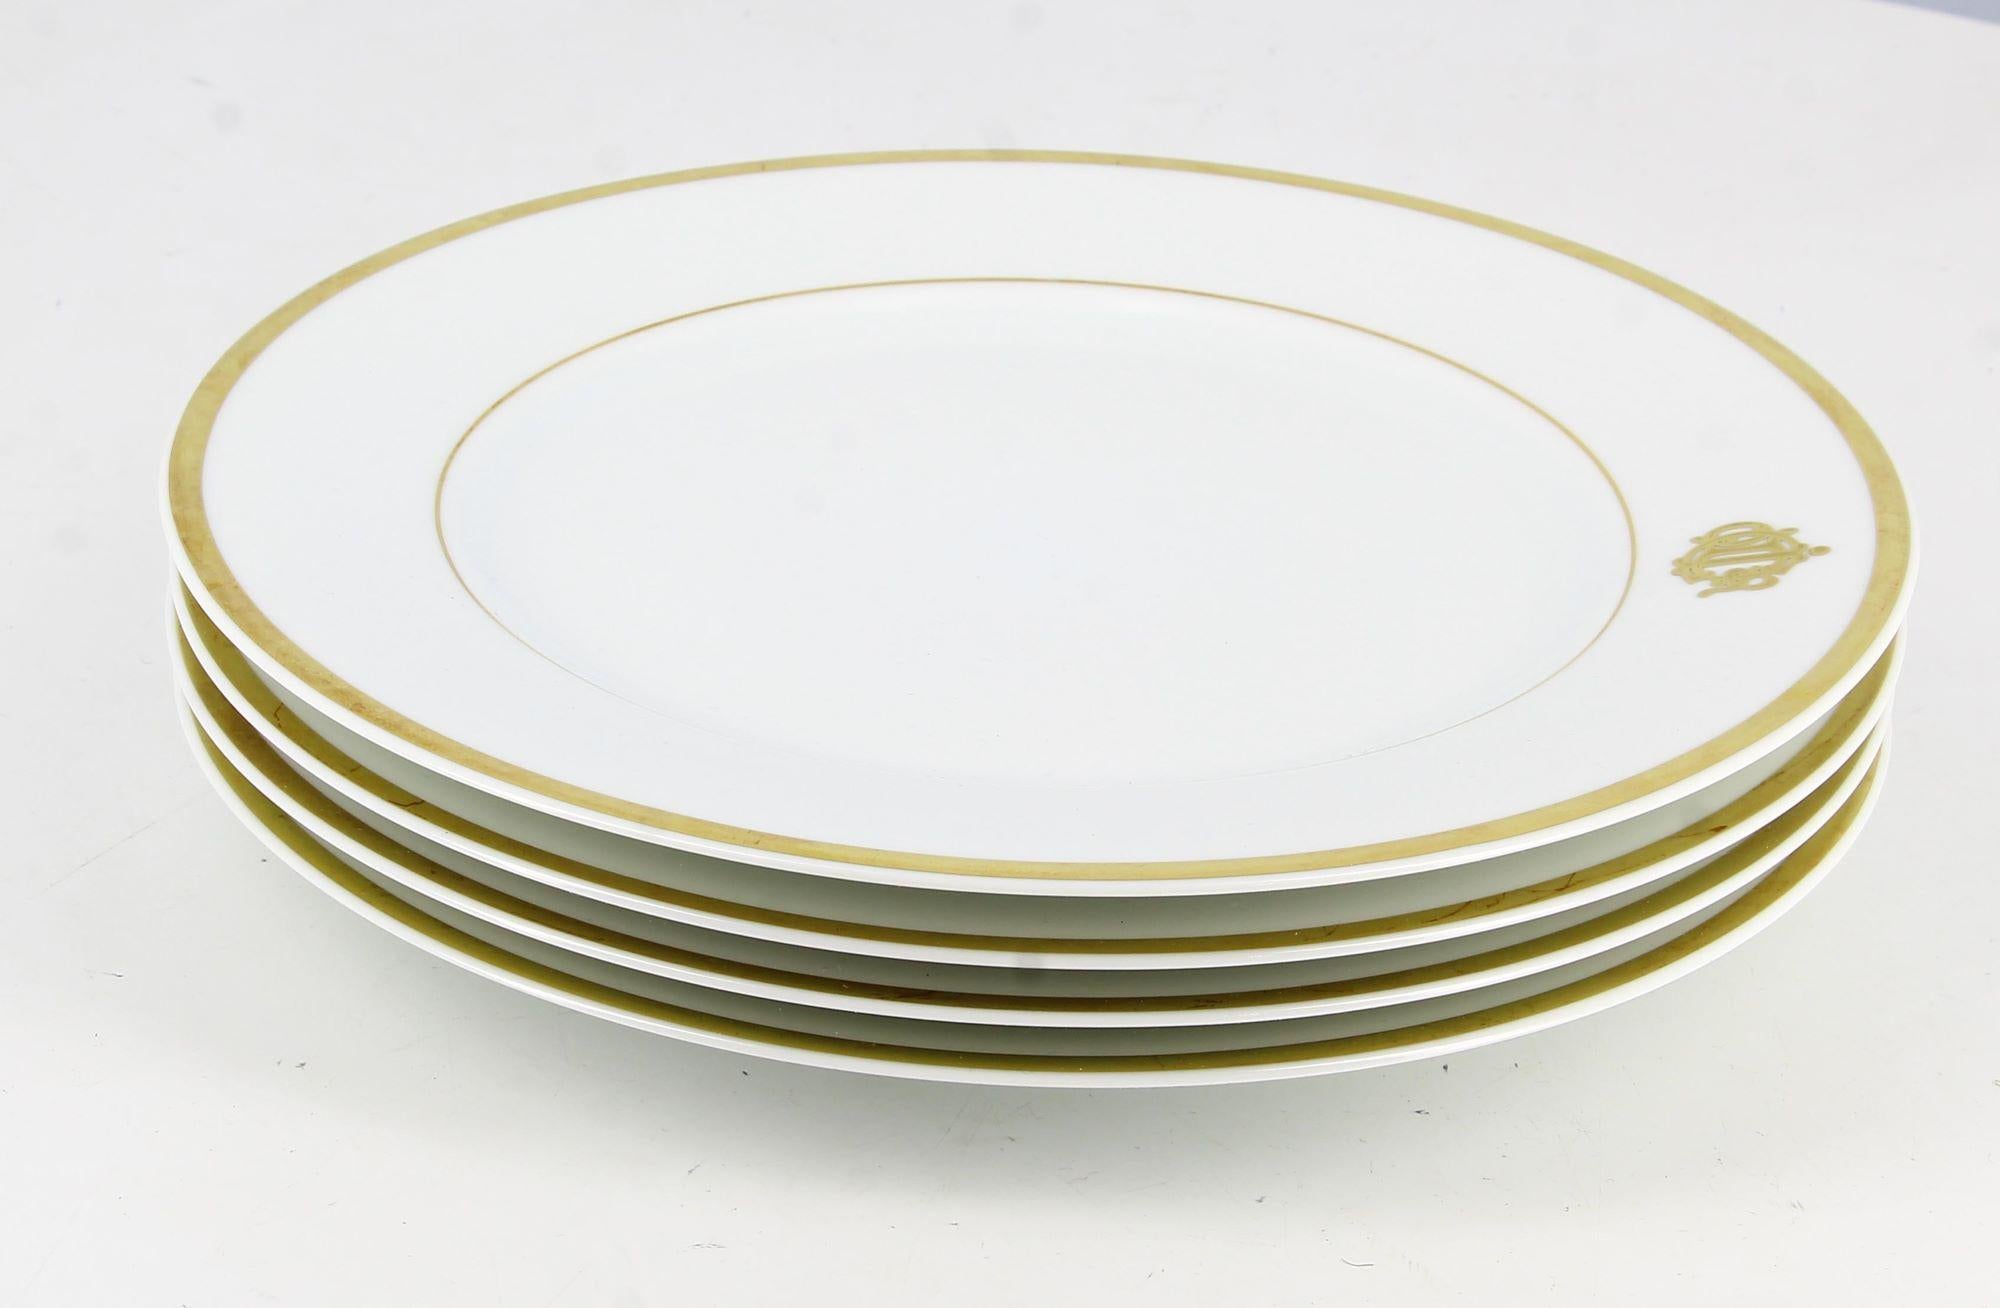 

4 Christian Dior Limoges Porcelain Plates

-Good condition. Shows very slight traces of wear and tear over time.
- 4 Christian Dior plates in Limoges porcelain
- Dior golden logo
- Contour golden
- Packaging : Opulence luxury vintage dust